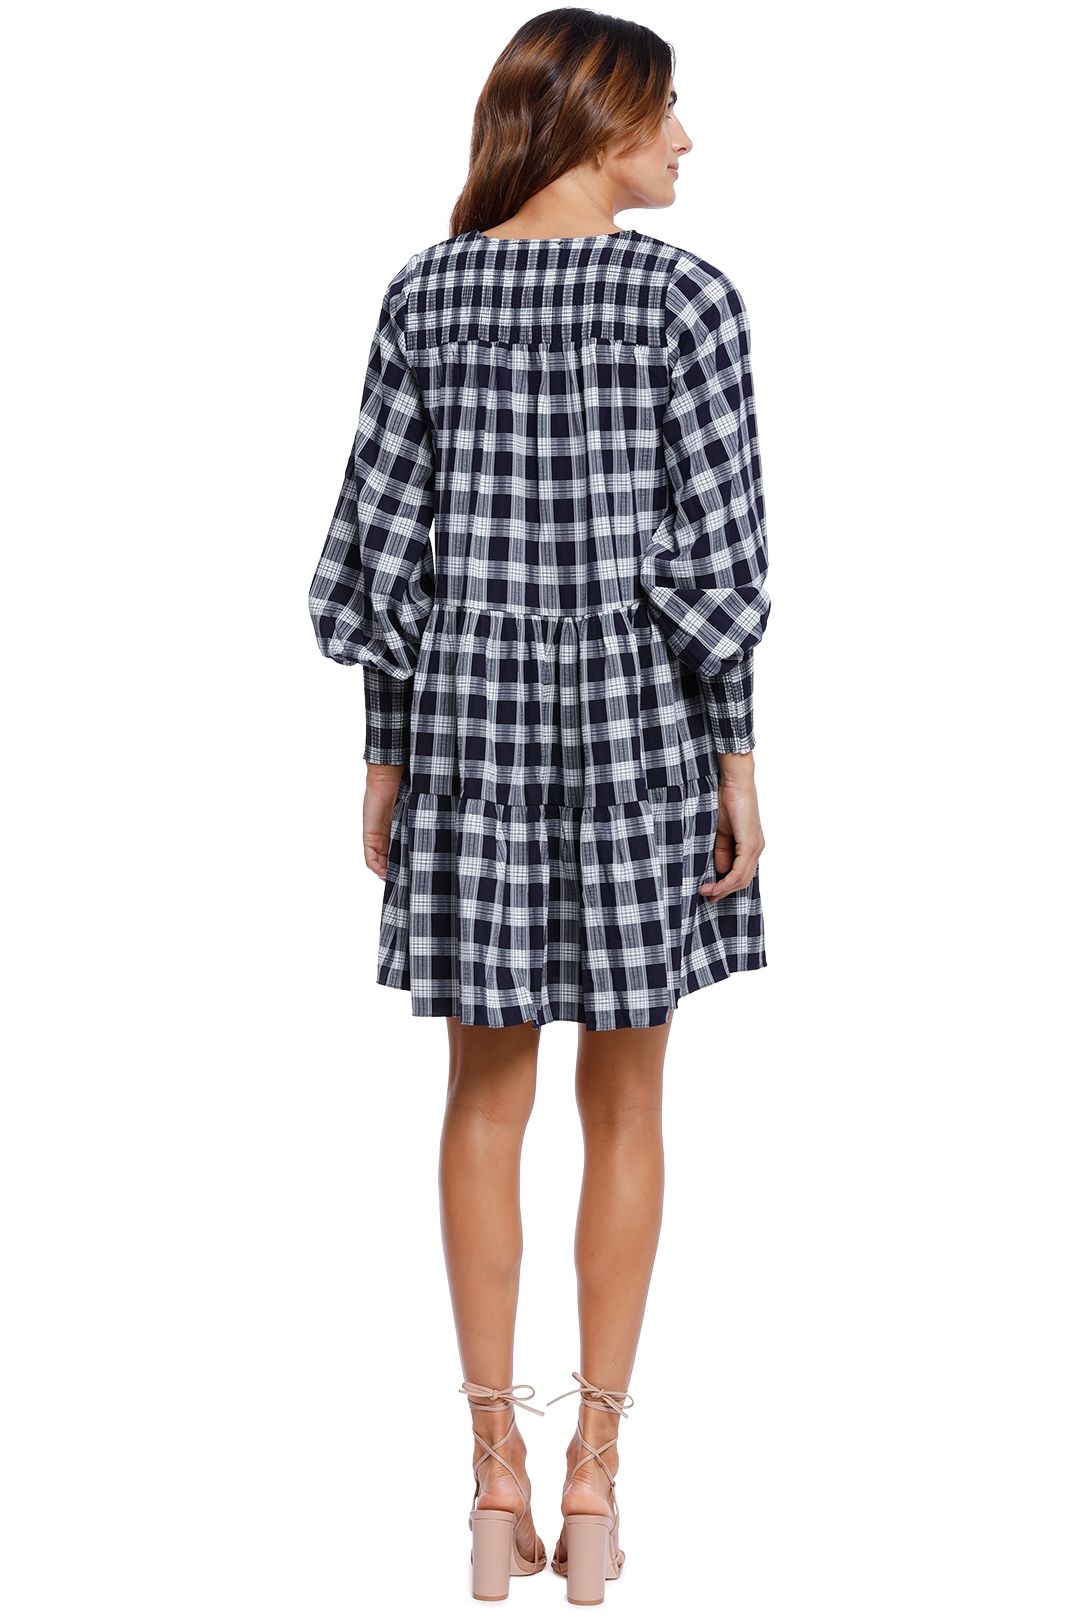 Witchery Tiered Check Dress Long Sleeve